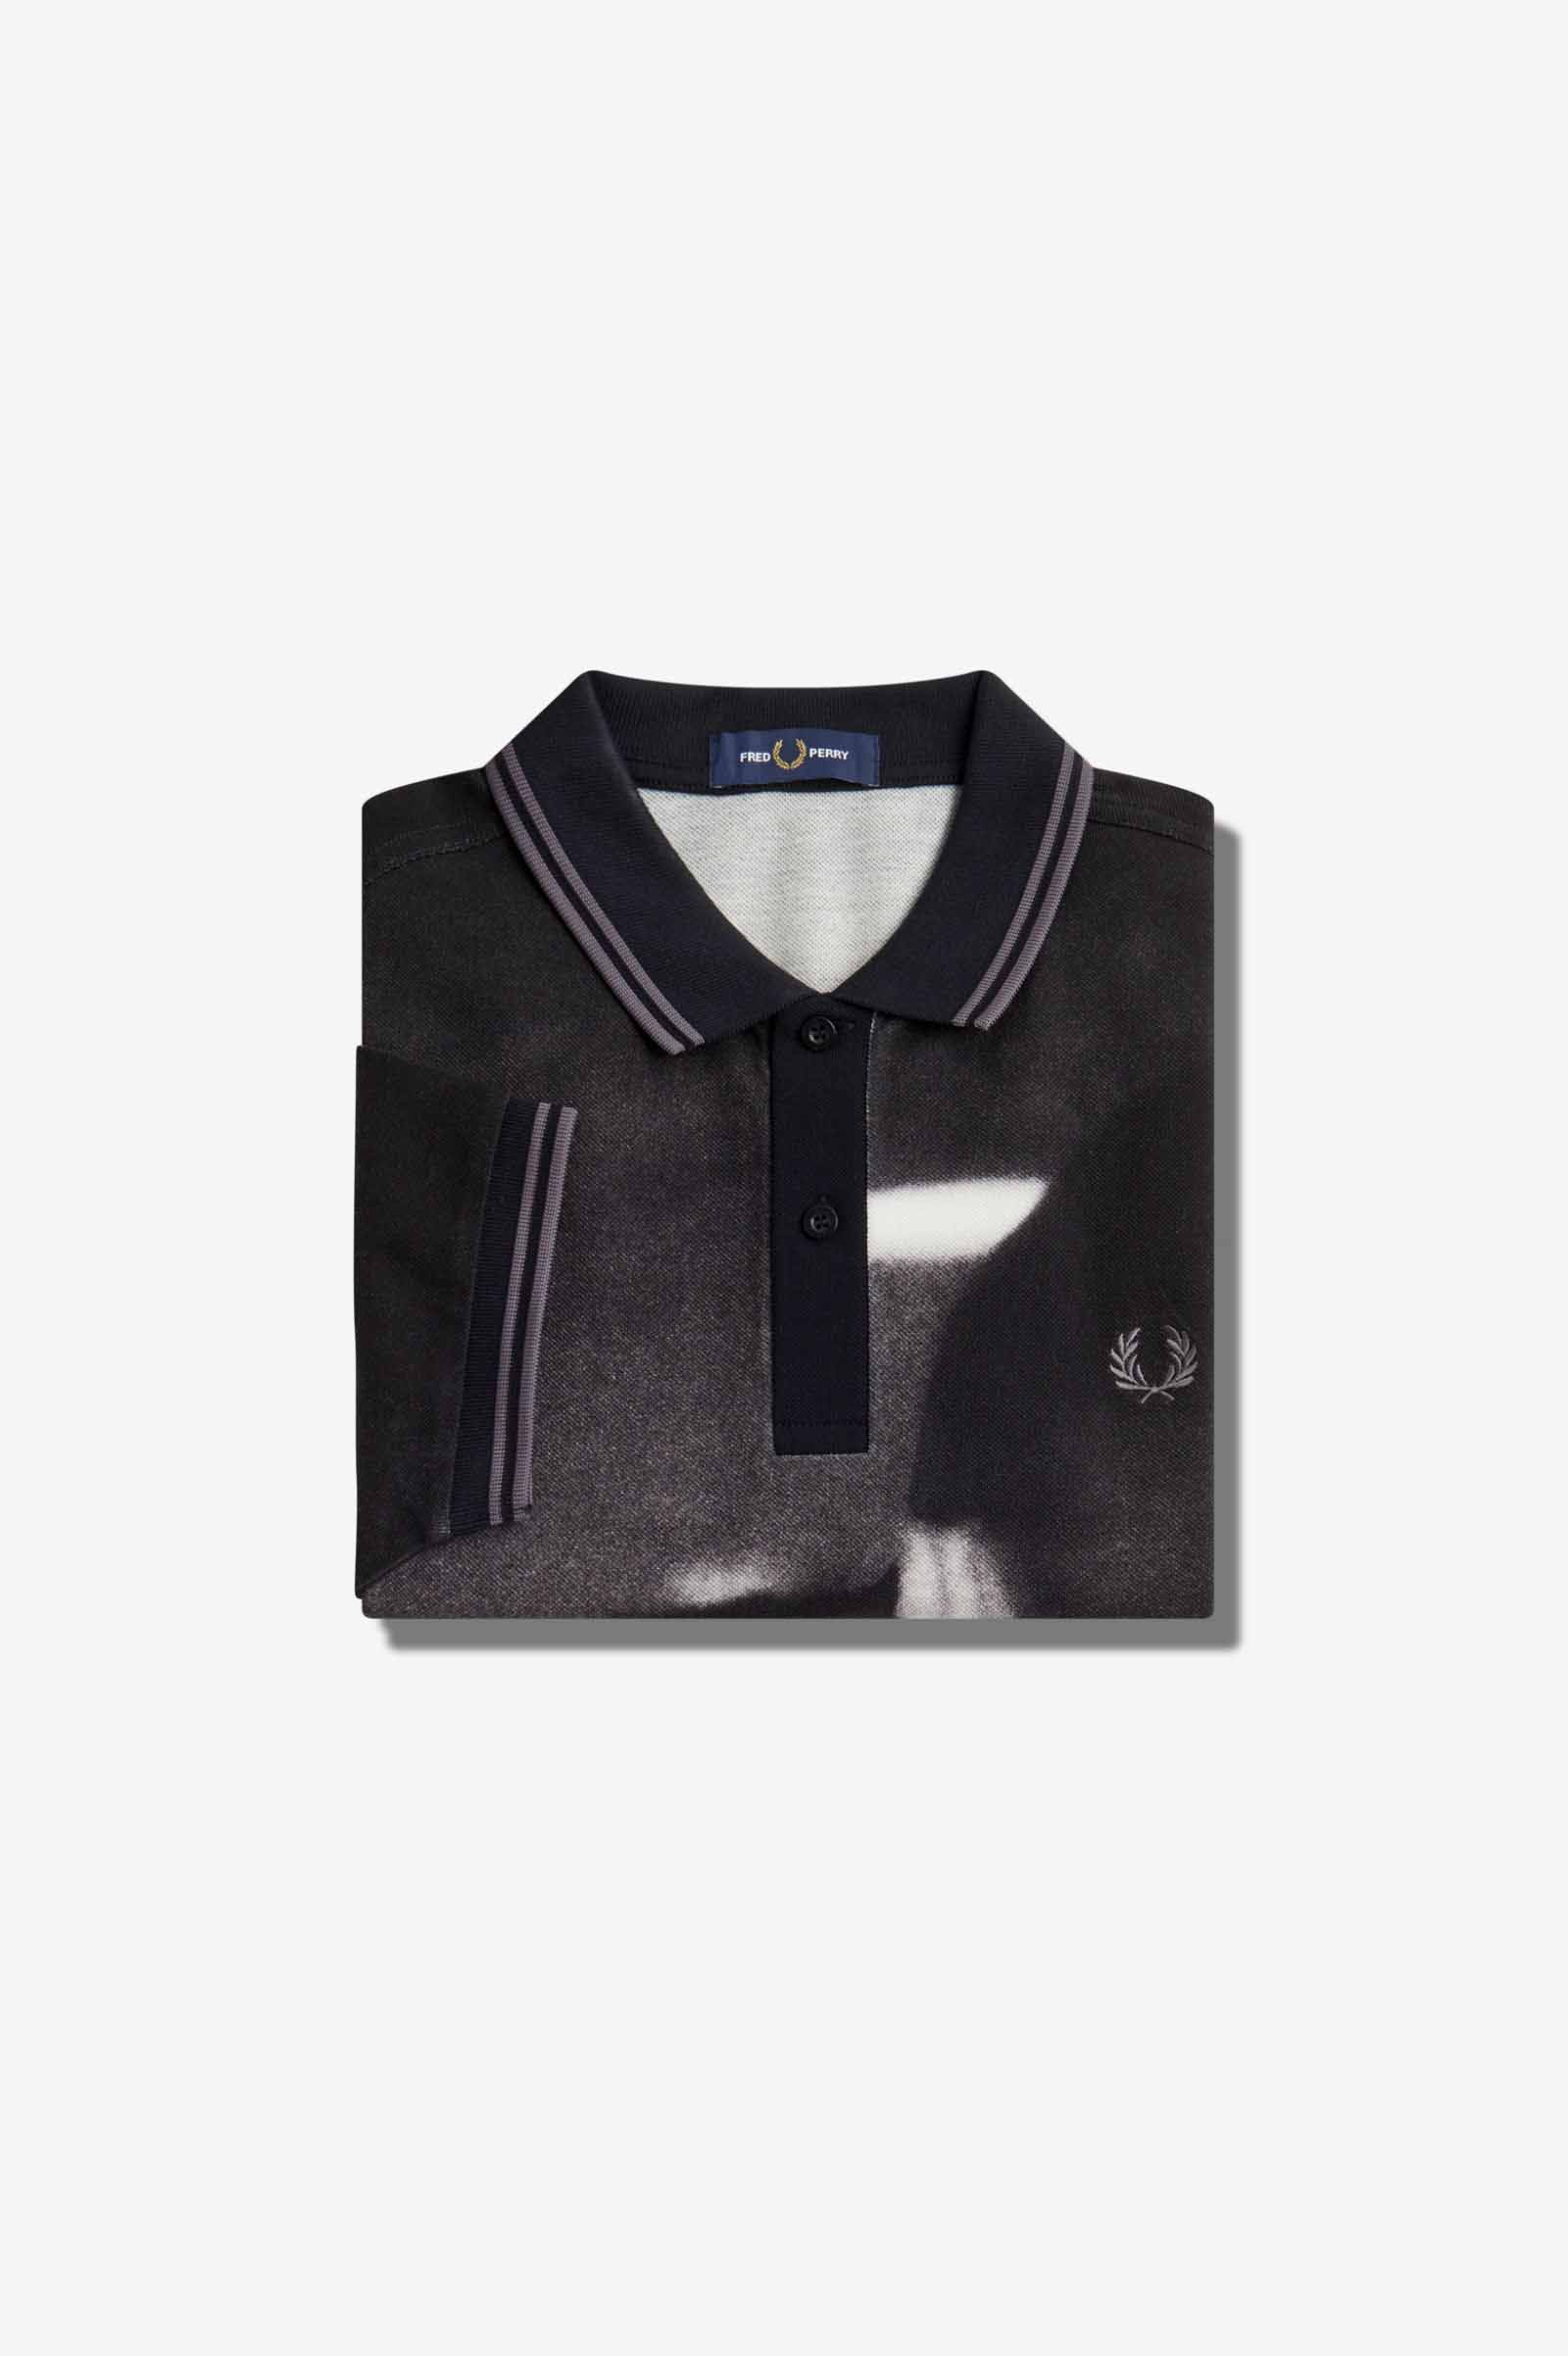 Rave Graphic Fred Perry Shirt